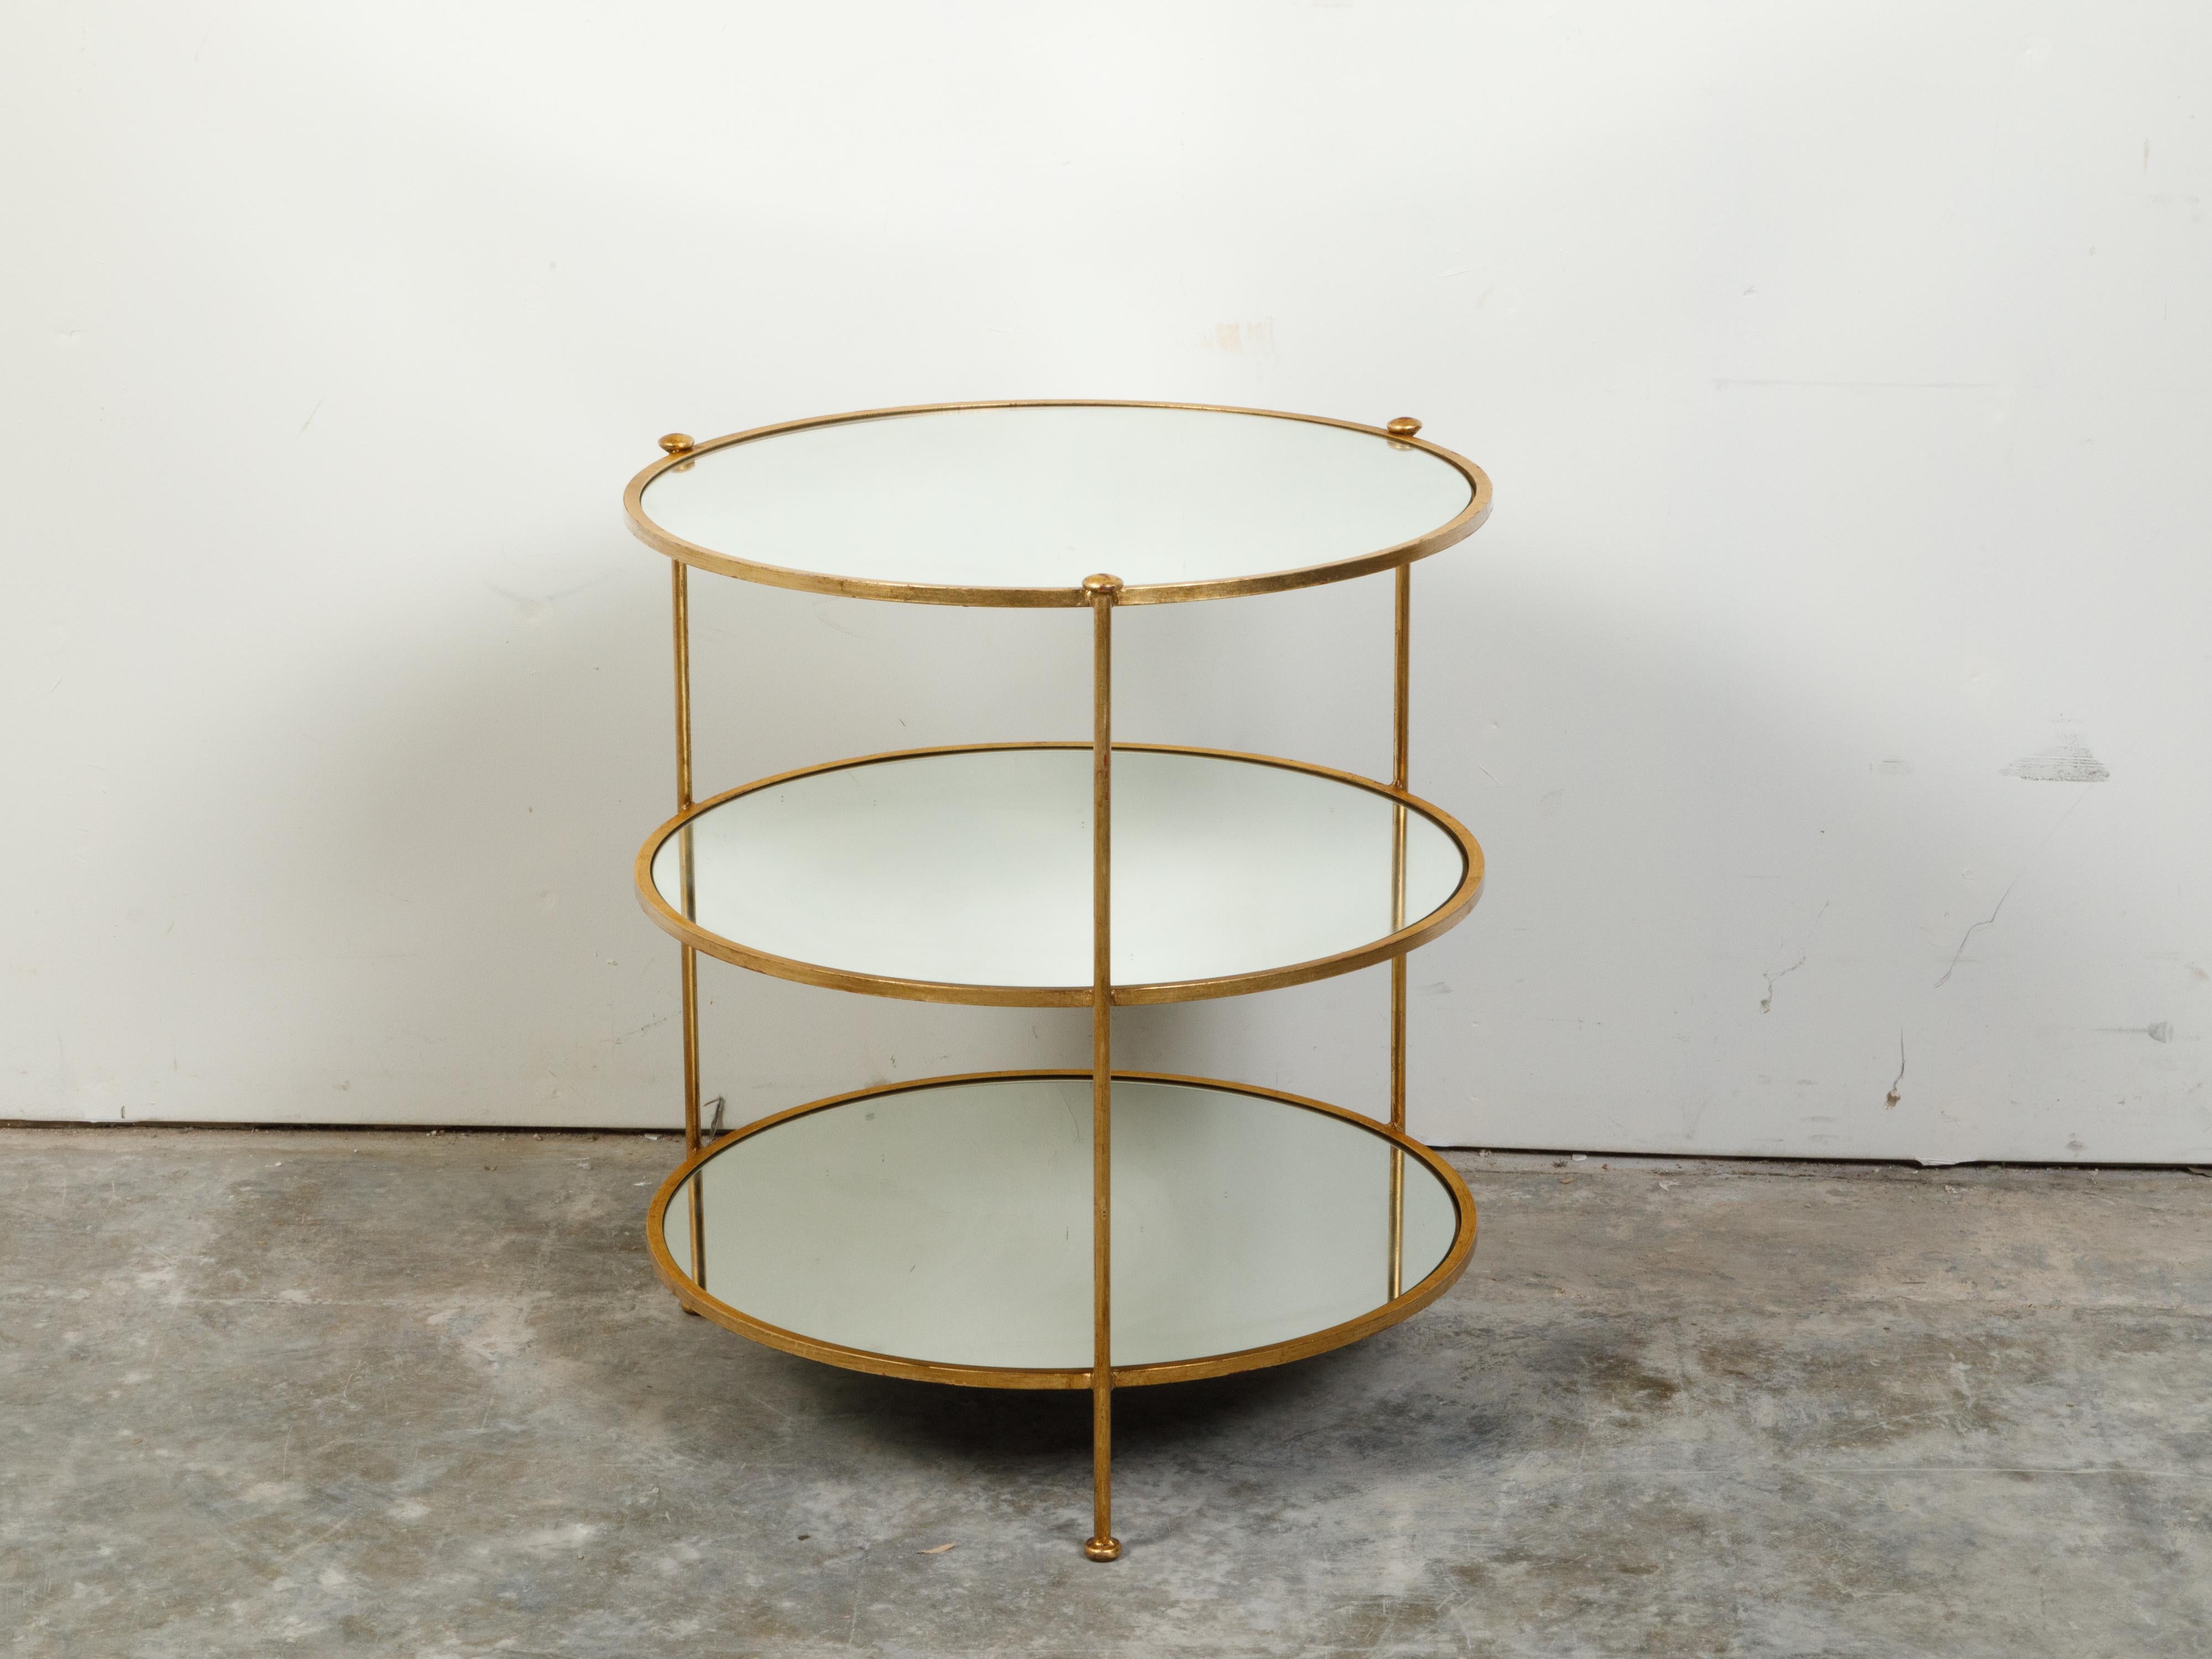 An Italian gilt iron three-tier side table from the mid 20th century, with round mirrored shelves. Created in Italy during the Midcentury period, this side table features three circular mirrored shelves secured inside a gilt metal structure. Raised